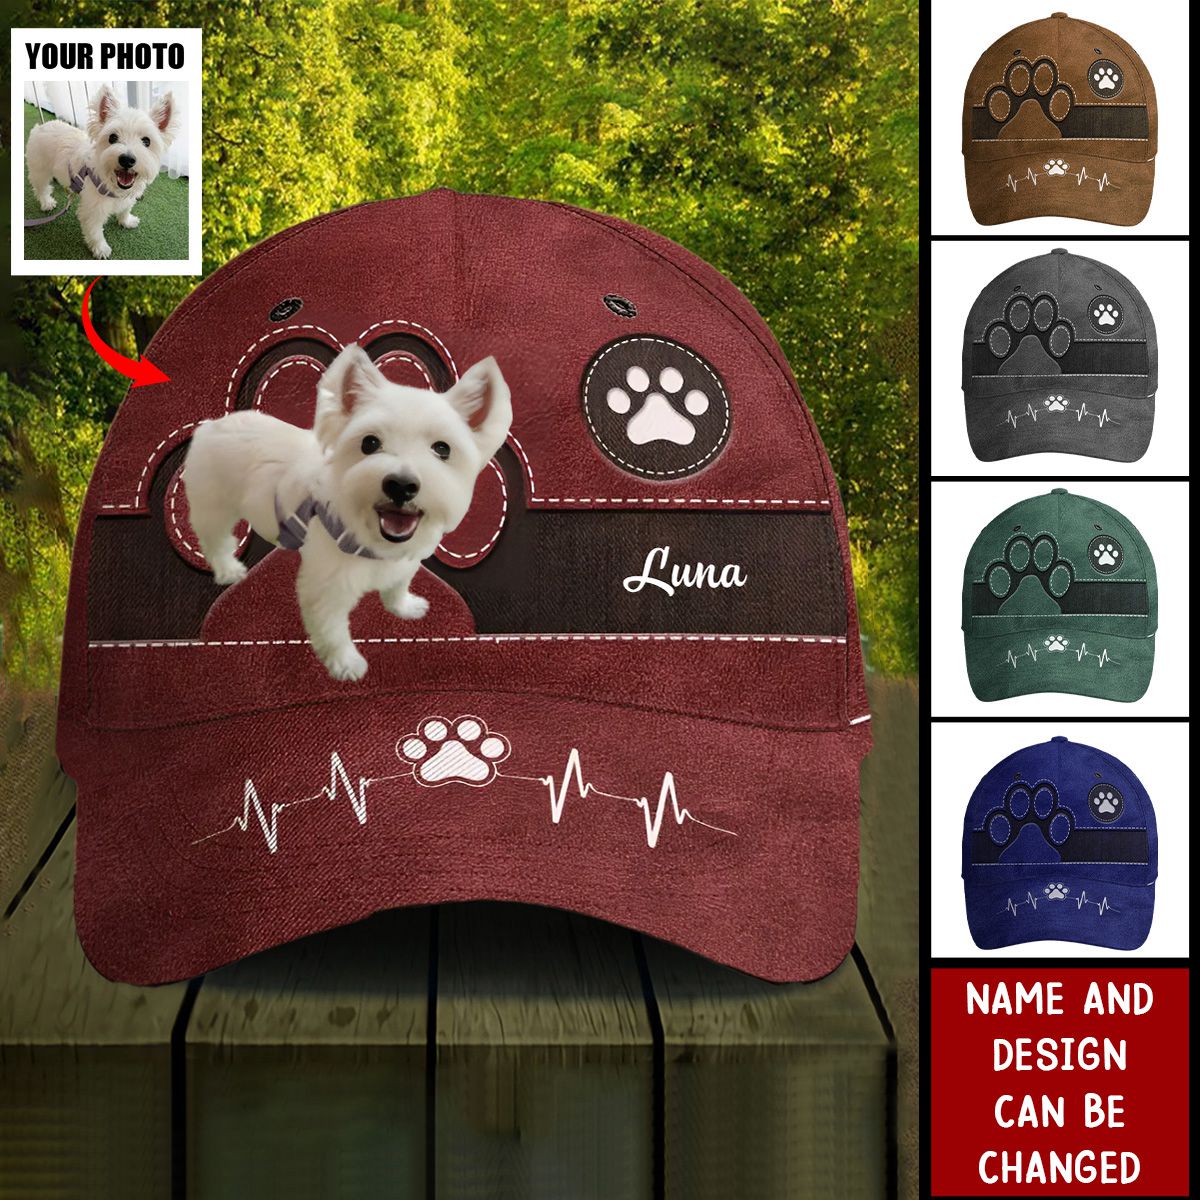 Keep Calm And Love Dogs - Dog & Cat Personalized Custom Hat, All Over Print Classic Cap - Gift For Pet Owners, Pet Lovers